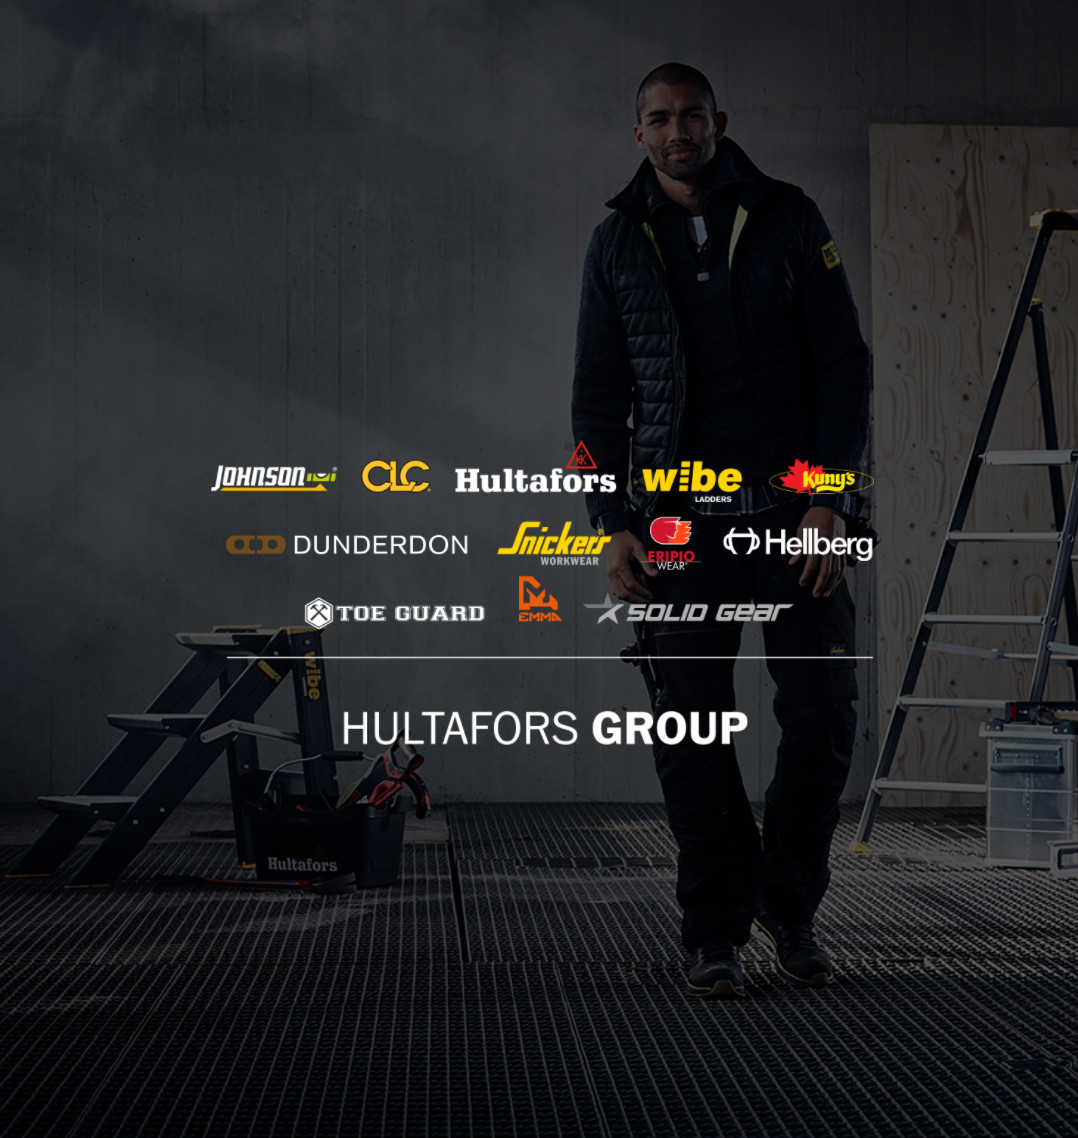 Hultafors Group adds CLC Work Gear to its portfolio—an American brand specialising in innovative tool backpacks and tool bags for the modern craftsman